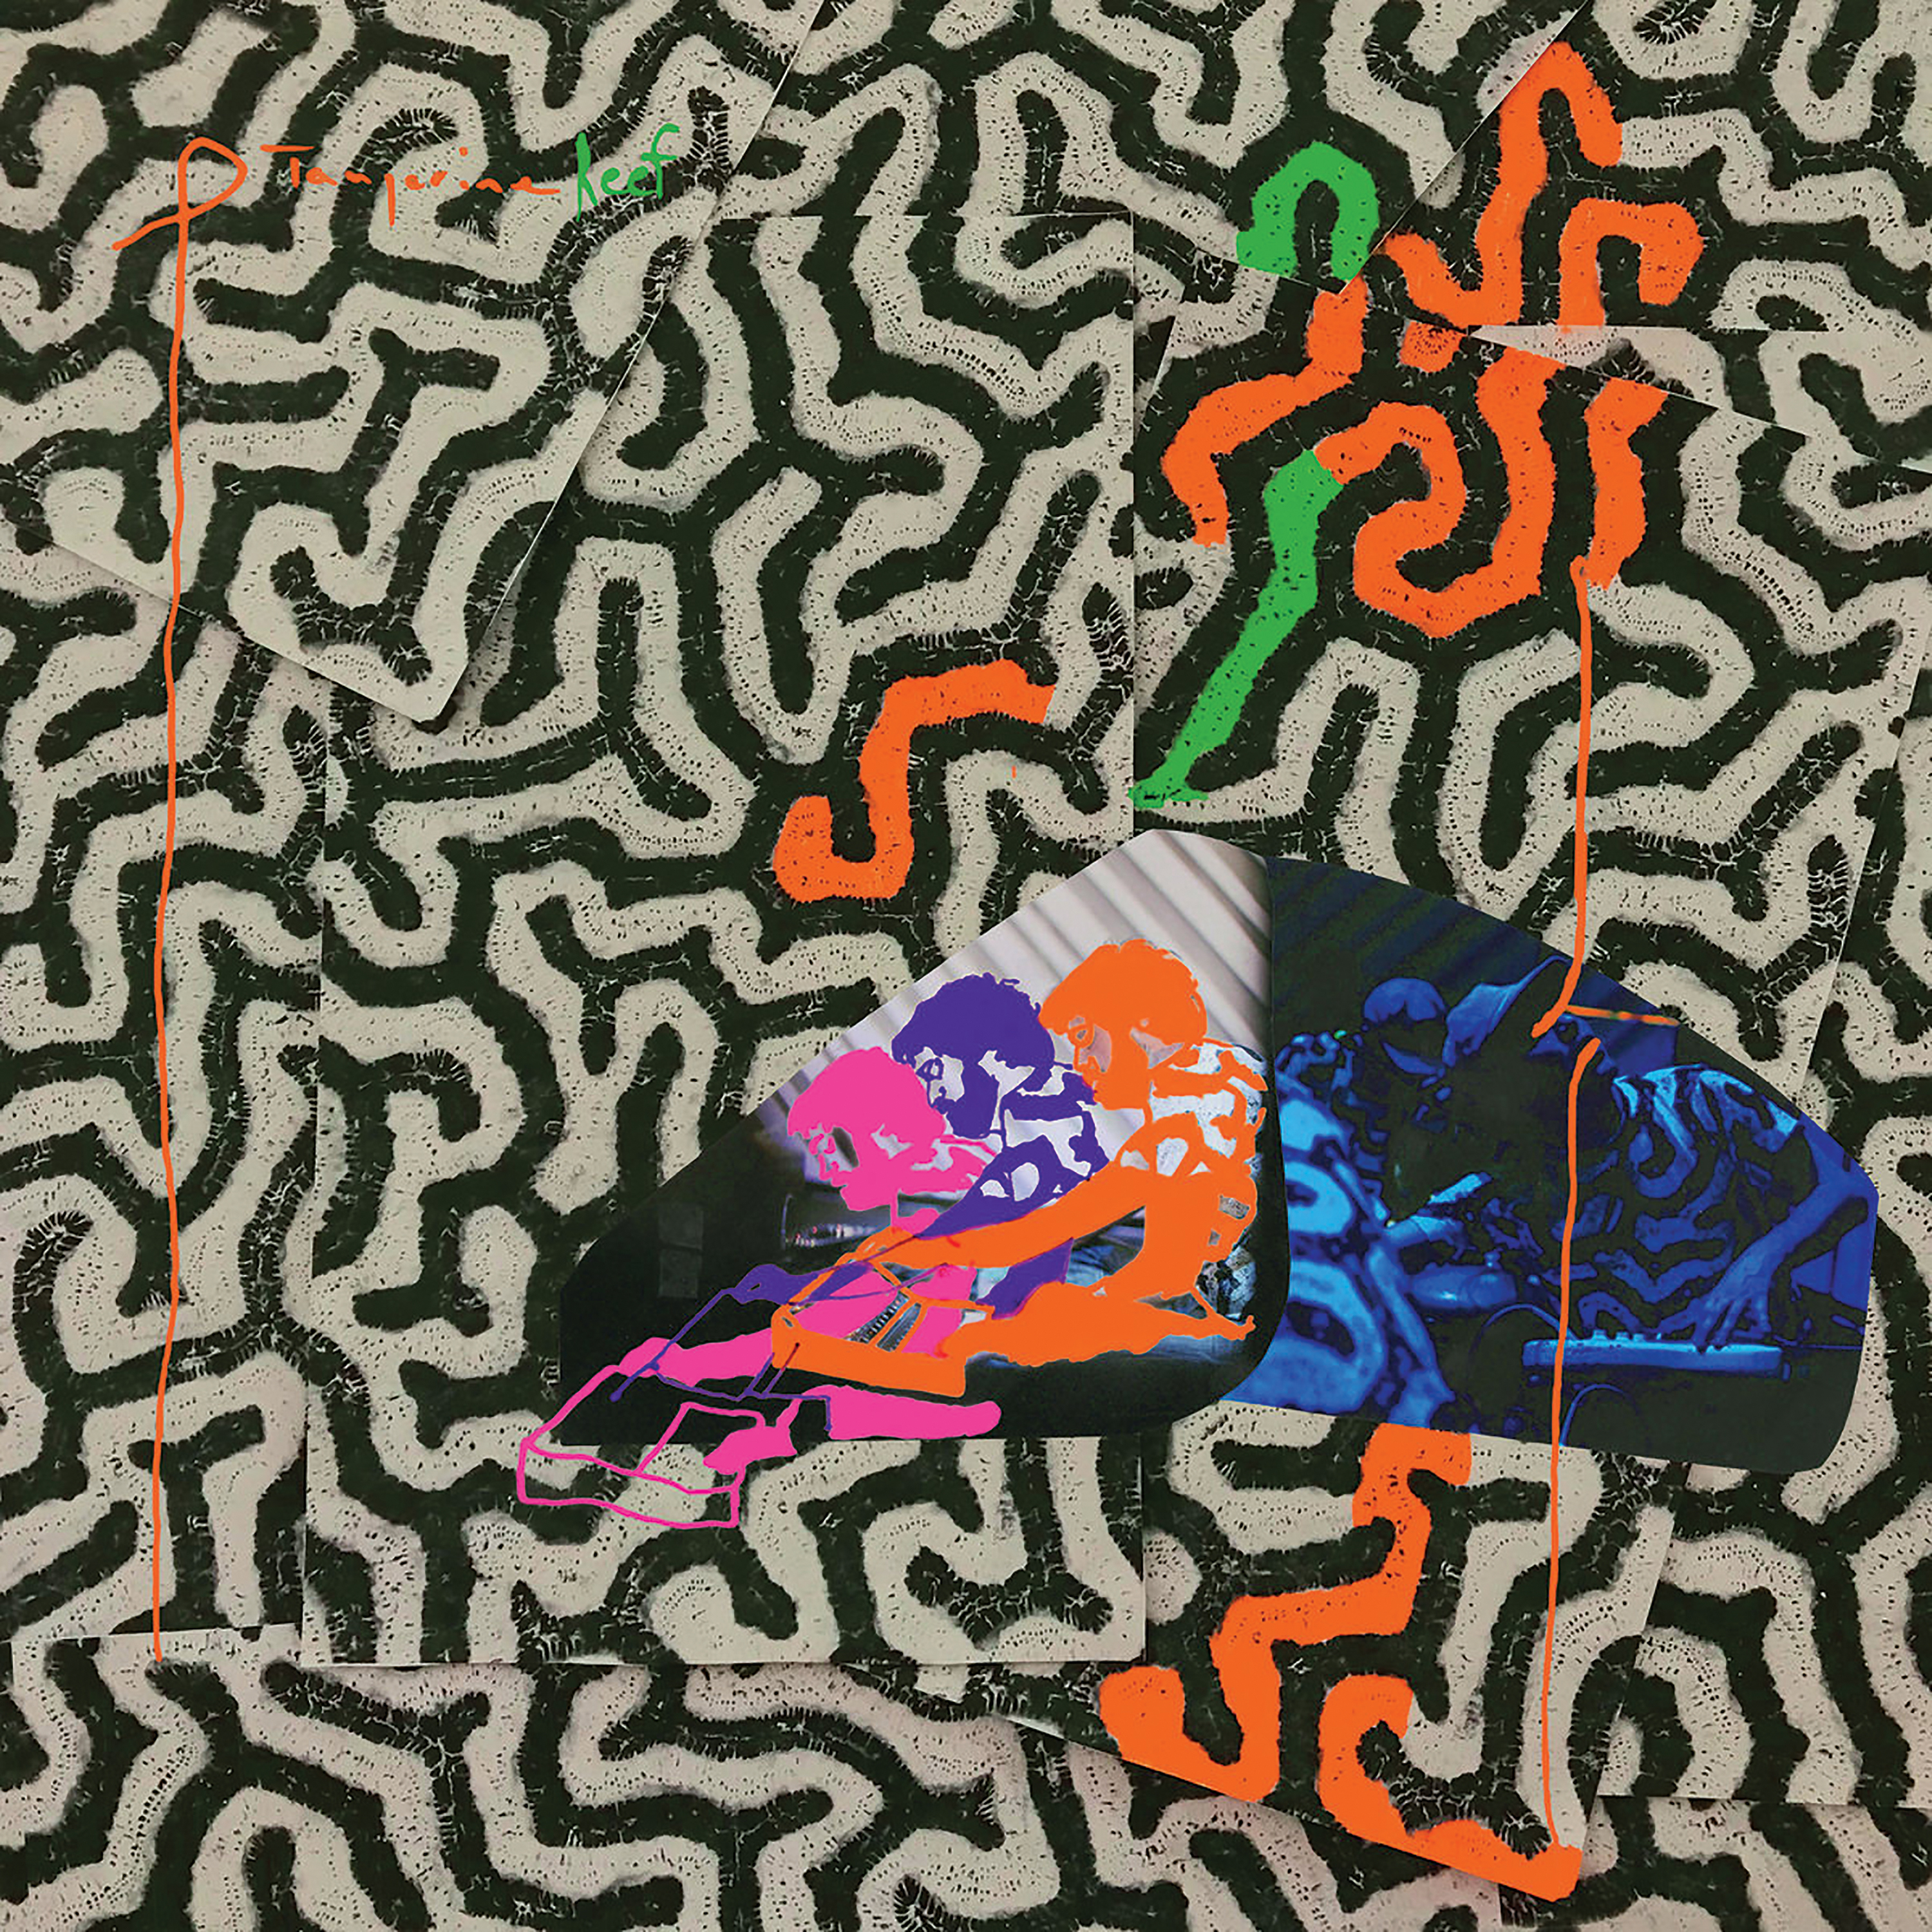 NowStreaming: Animal Collective / Clutch / Jake Shears